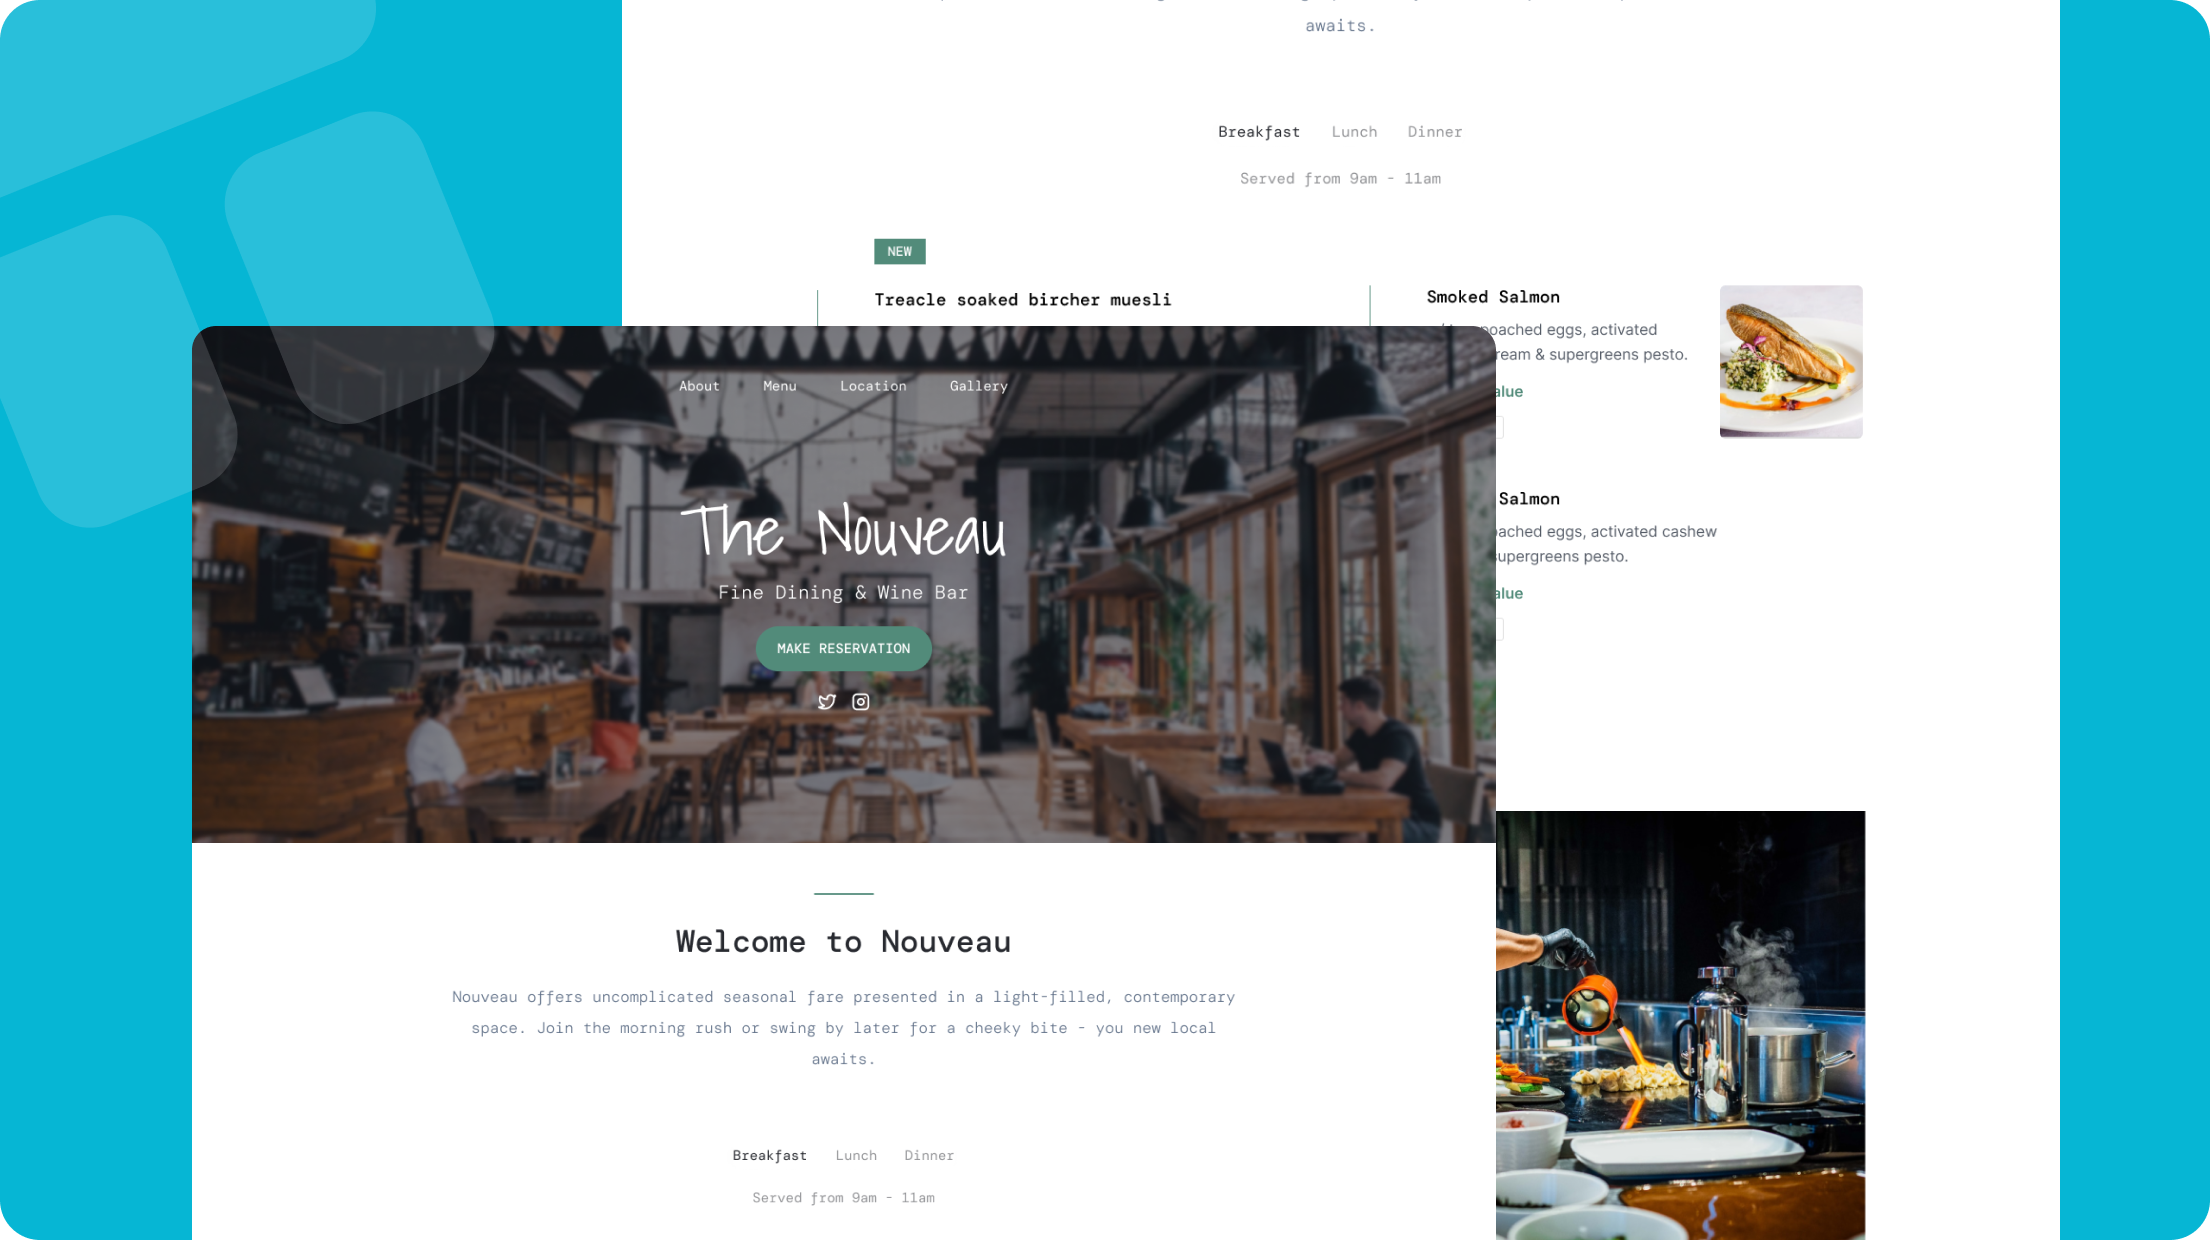 Siimple restaurant website theme on teal blue background